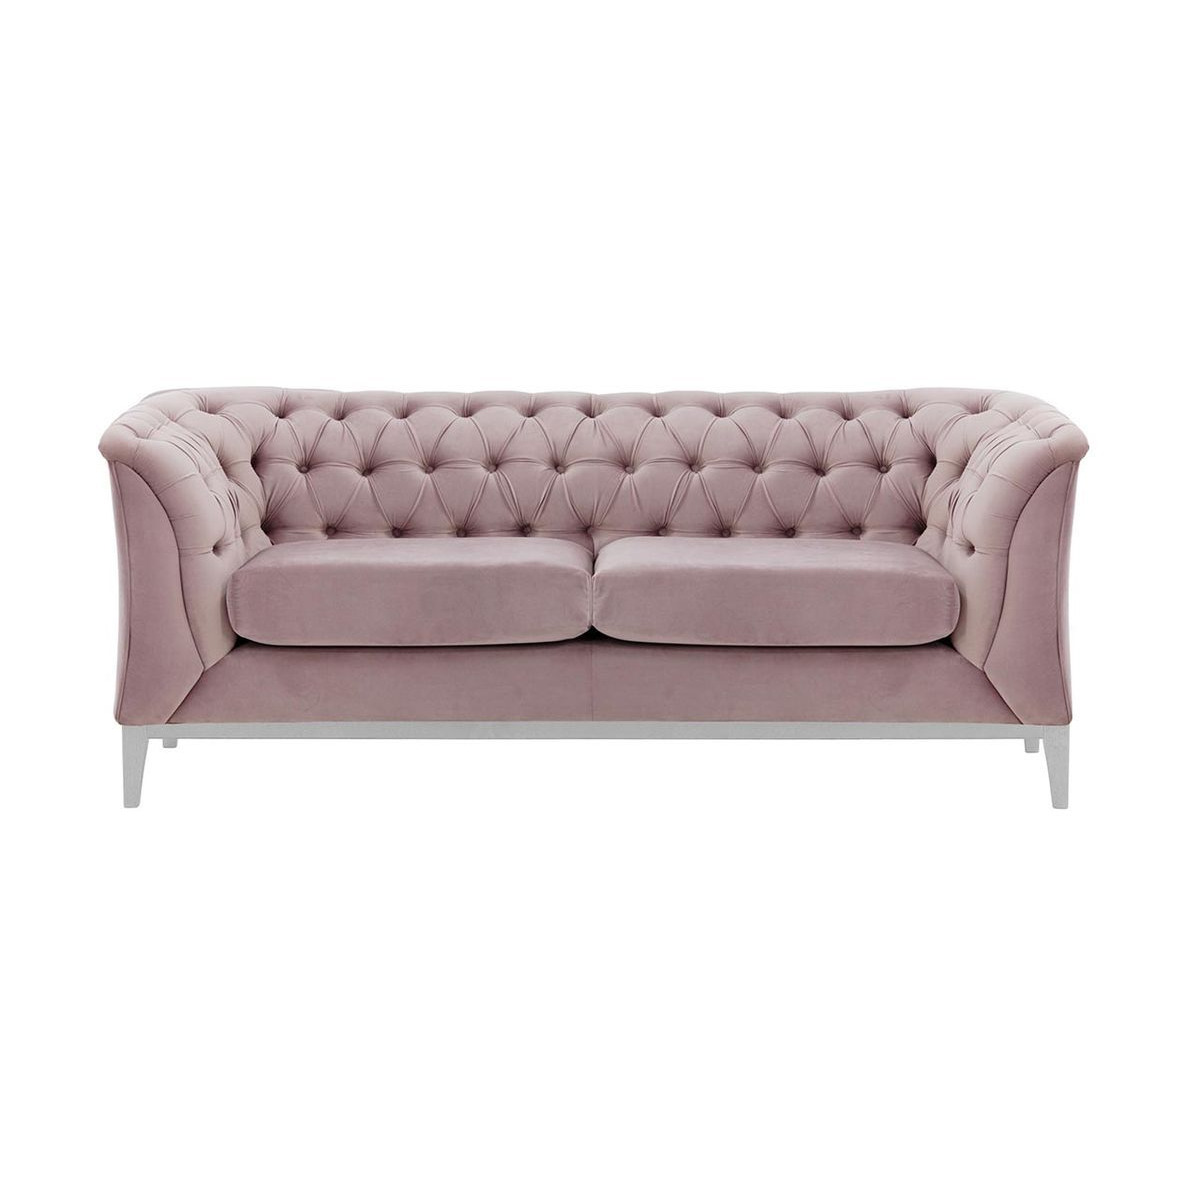 Chesterfield Modern 2 Seater Sofa Wood, lilac, Leg colour: white - image 1